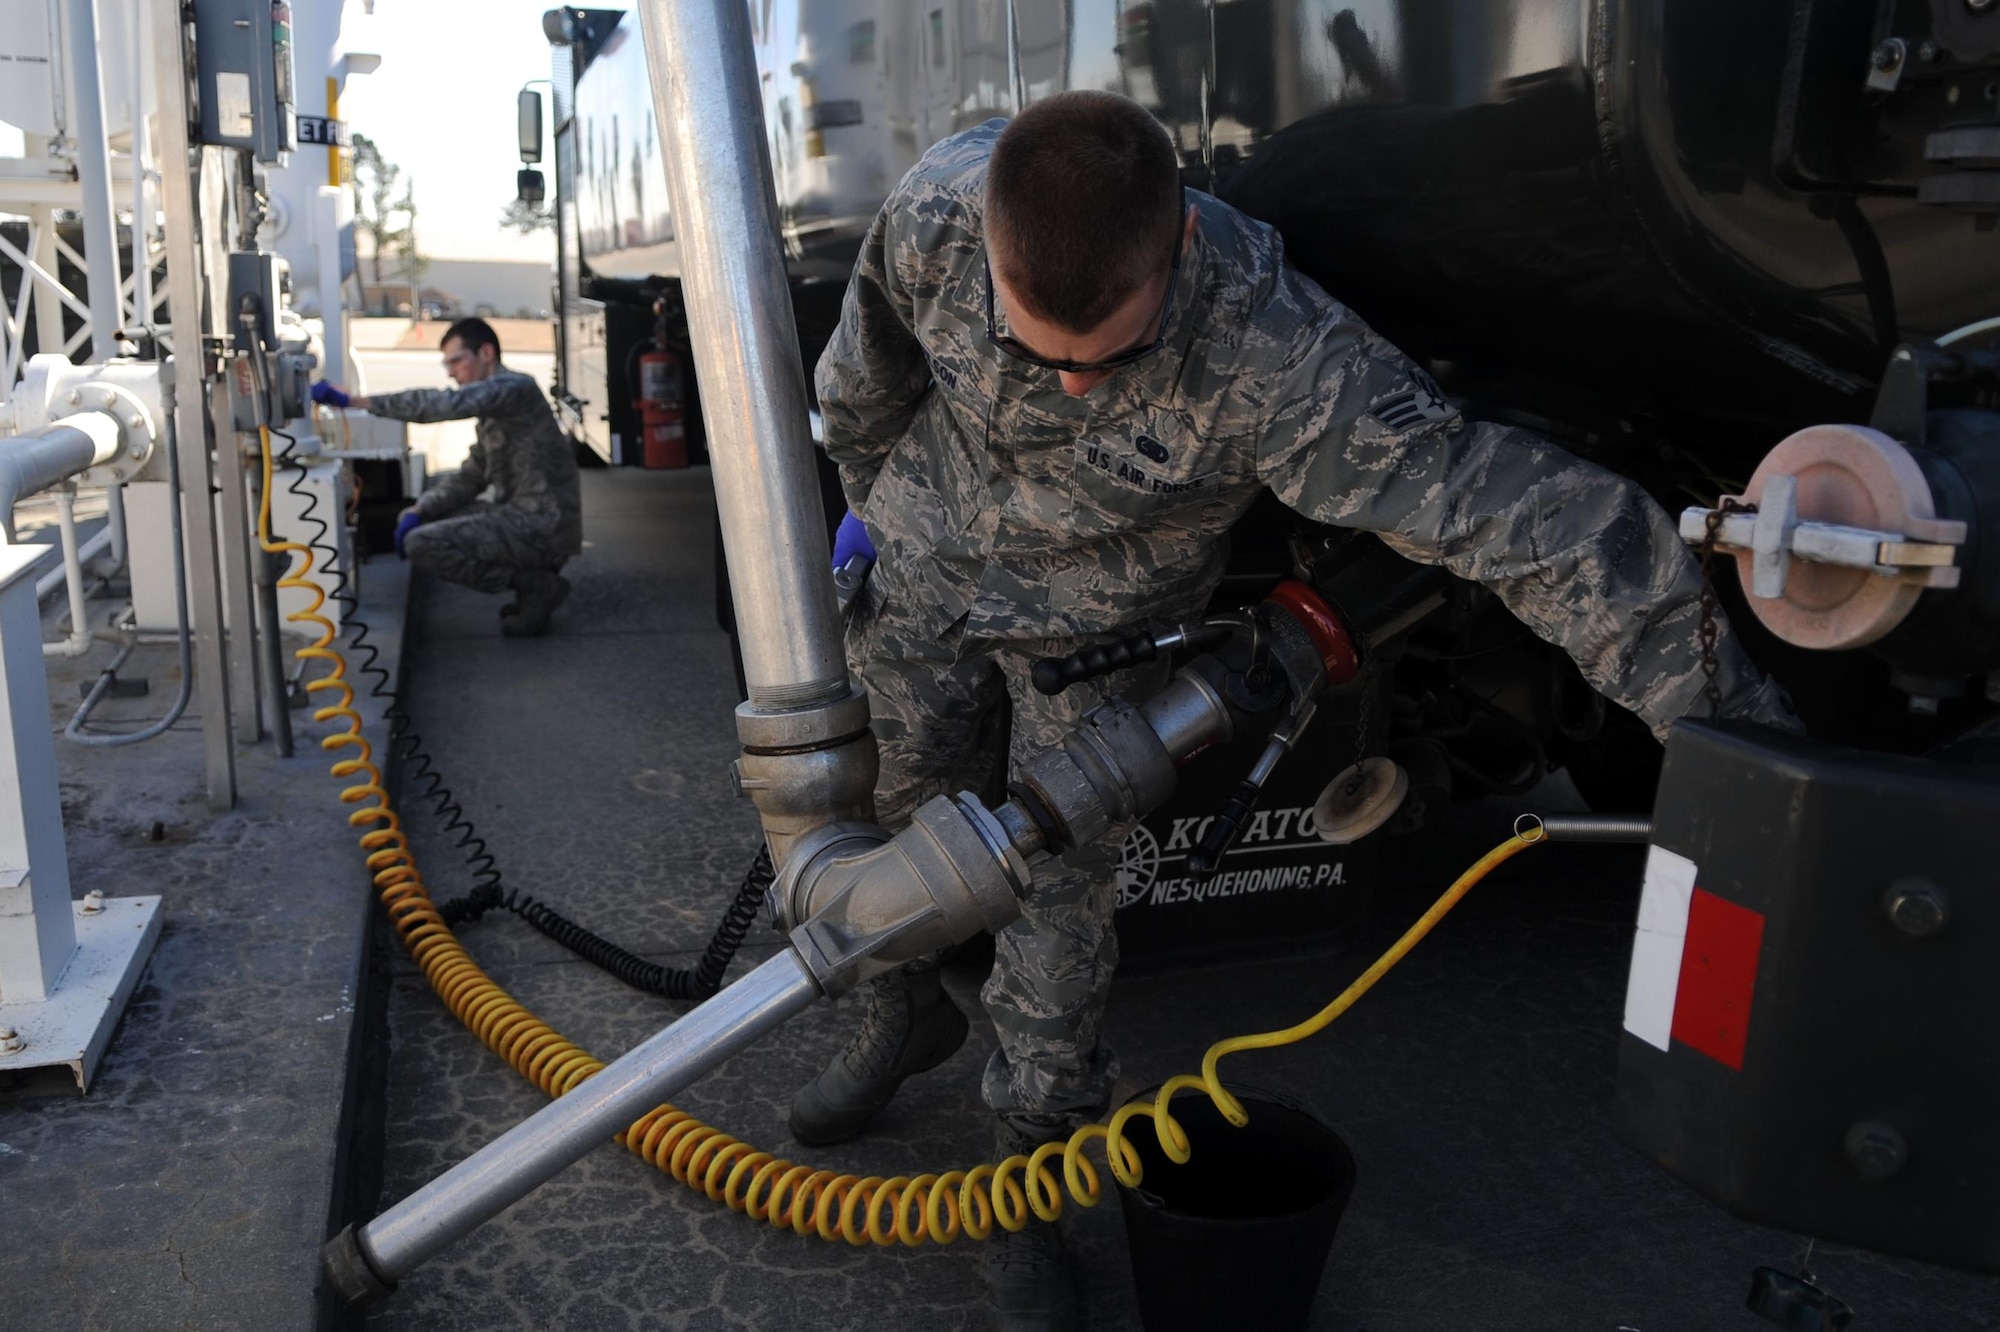 Senior Airmen Derek Wilson, foreground, and Noah Lazurka sample the fuel from a tank Feb. 11, 2015, at Seymour Johnson Air Force Base, N.C. Laboratory technicians test all fuel upon receipt, and at various other scheduled intervals. Wilson and Lazurka are both 4th Logistics Readiness Squadron fuels laboratory technicians. (U.S. Air Force photo/Senior Airman Ashley J. Thum)